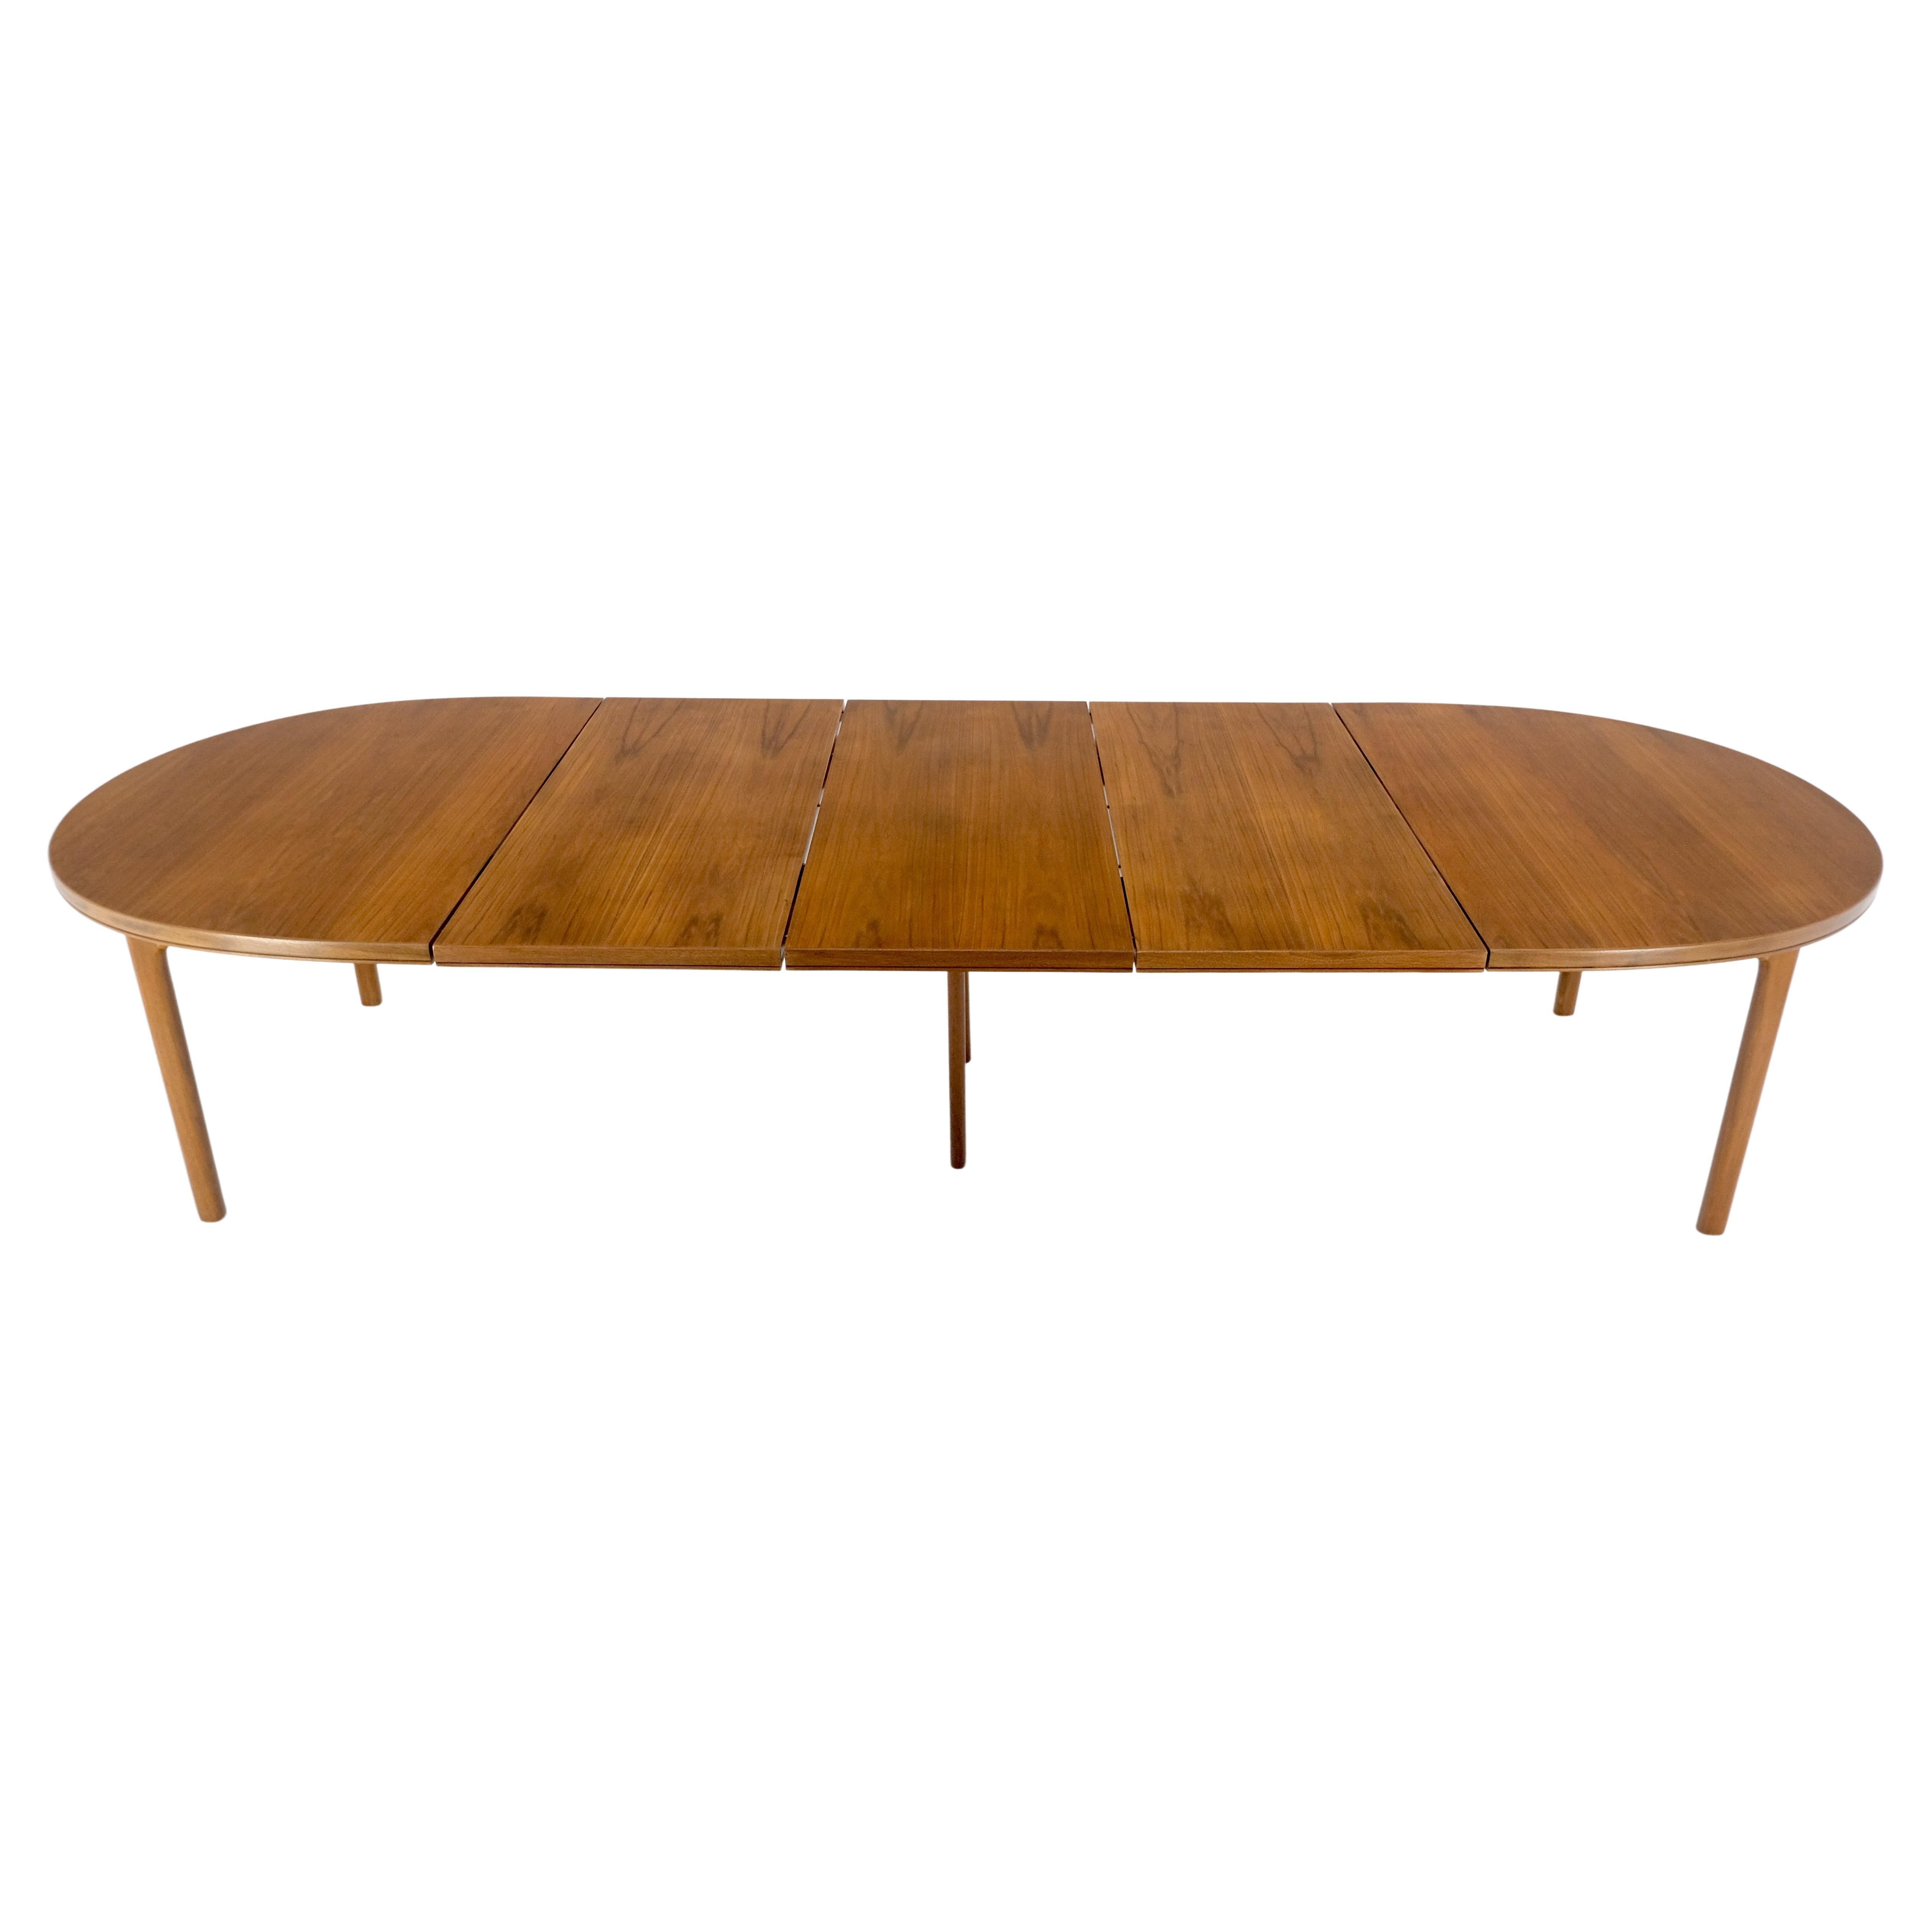 Dux of Sweden Oval Walnut Danish Dining Table w/ 3Leaves Total 135" in Length   For Sale